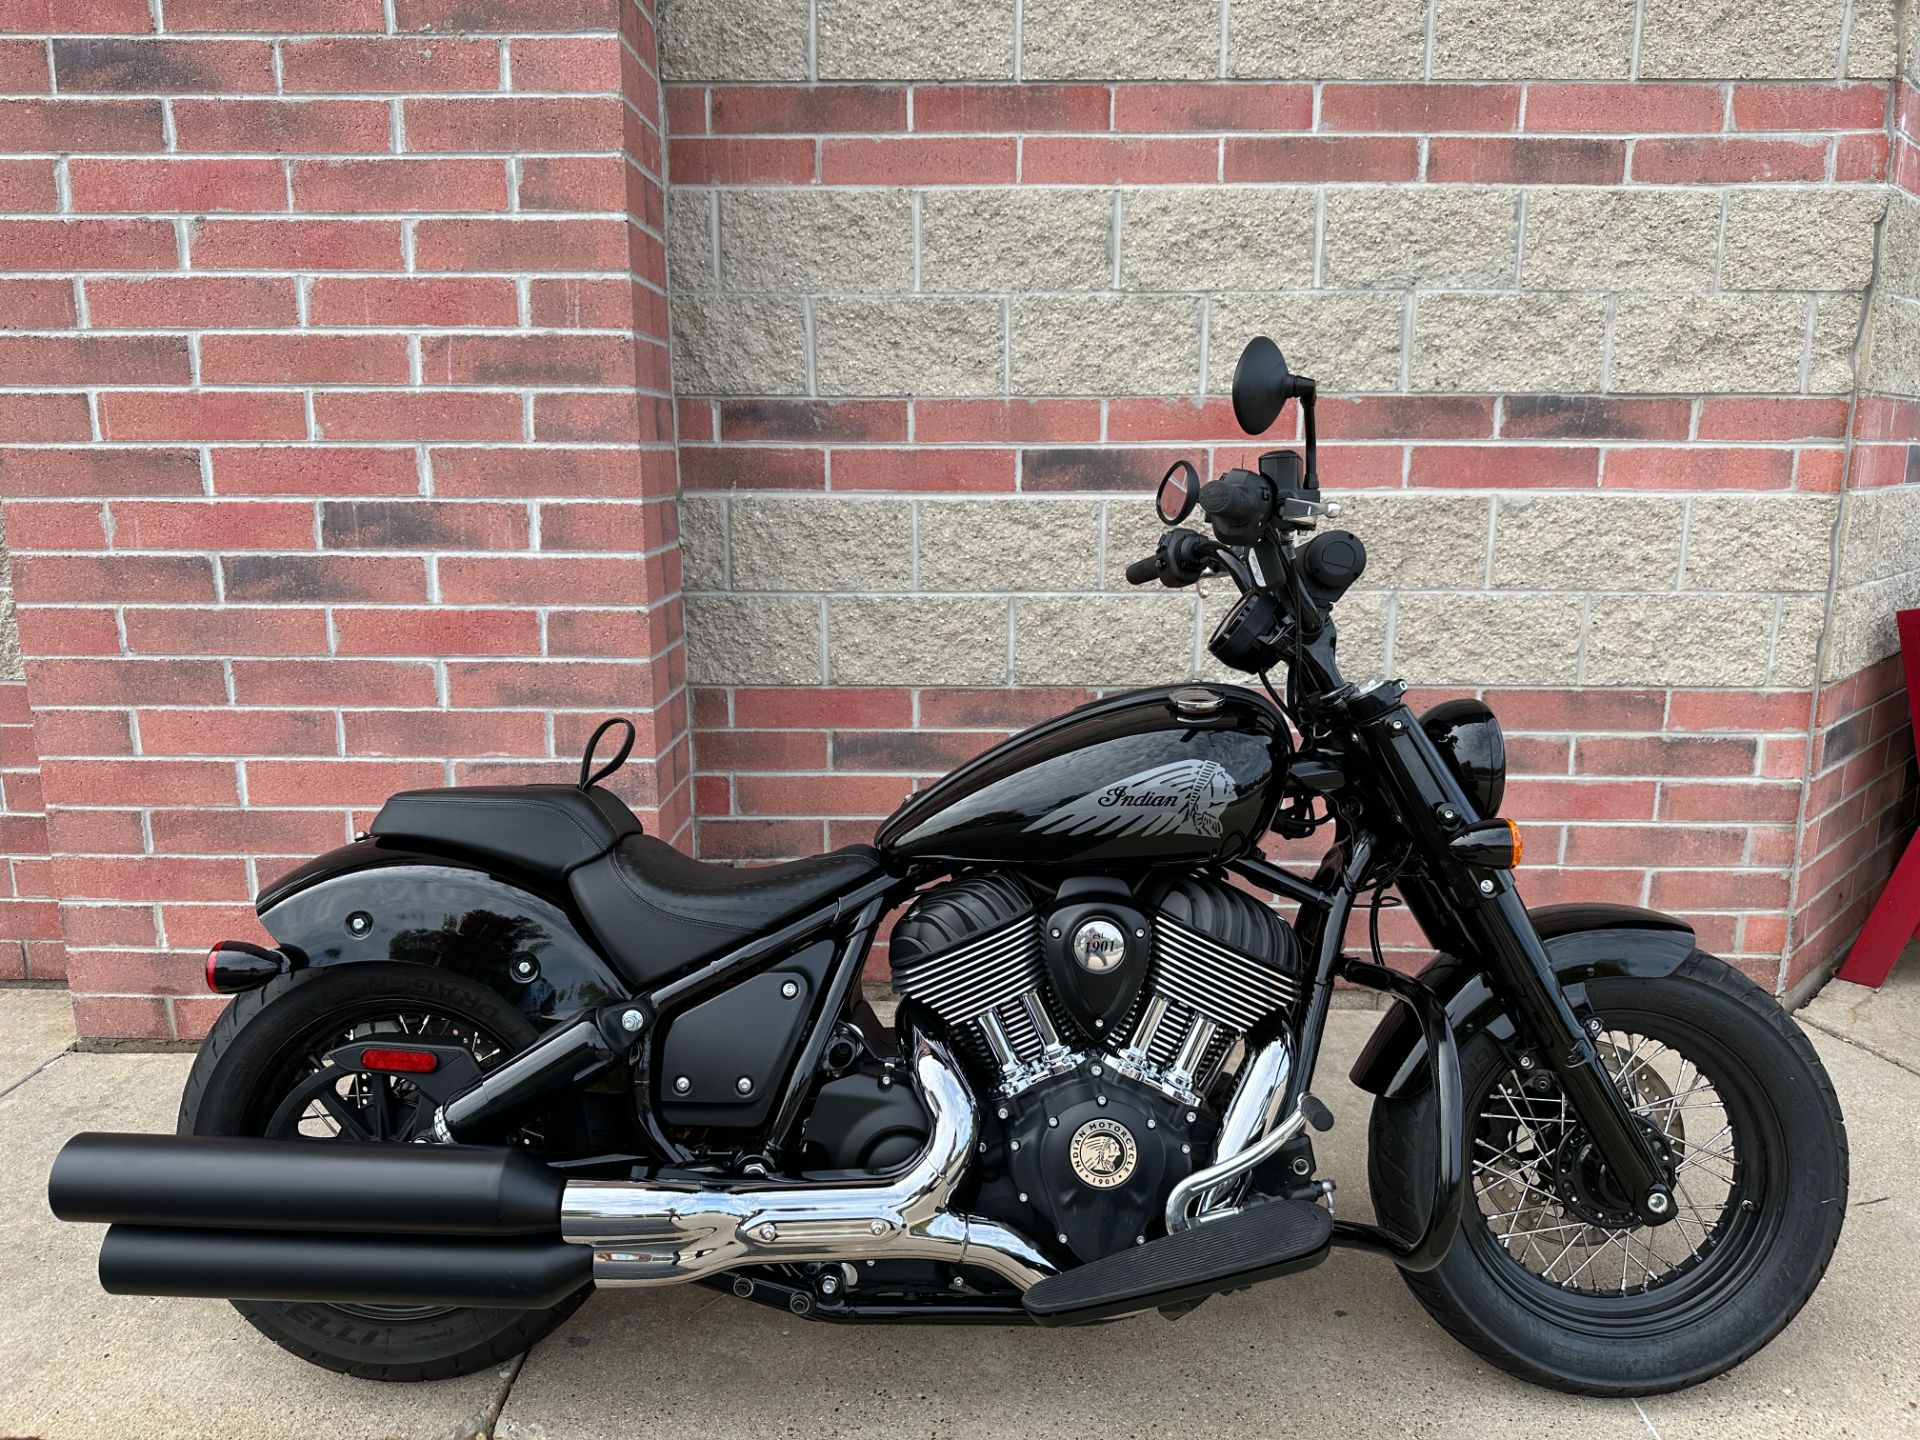 2022 Indian Motorcycle Chief Bobber ABS in Muskego, Wisconsin - Photo 1